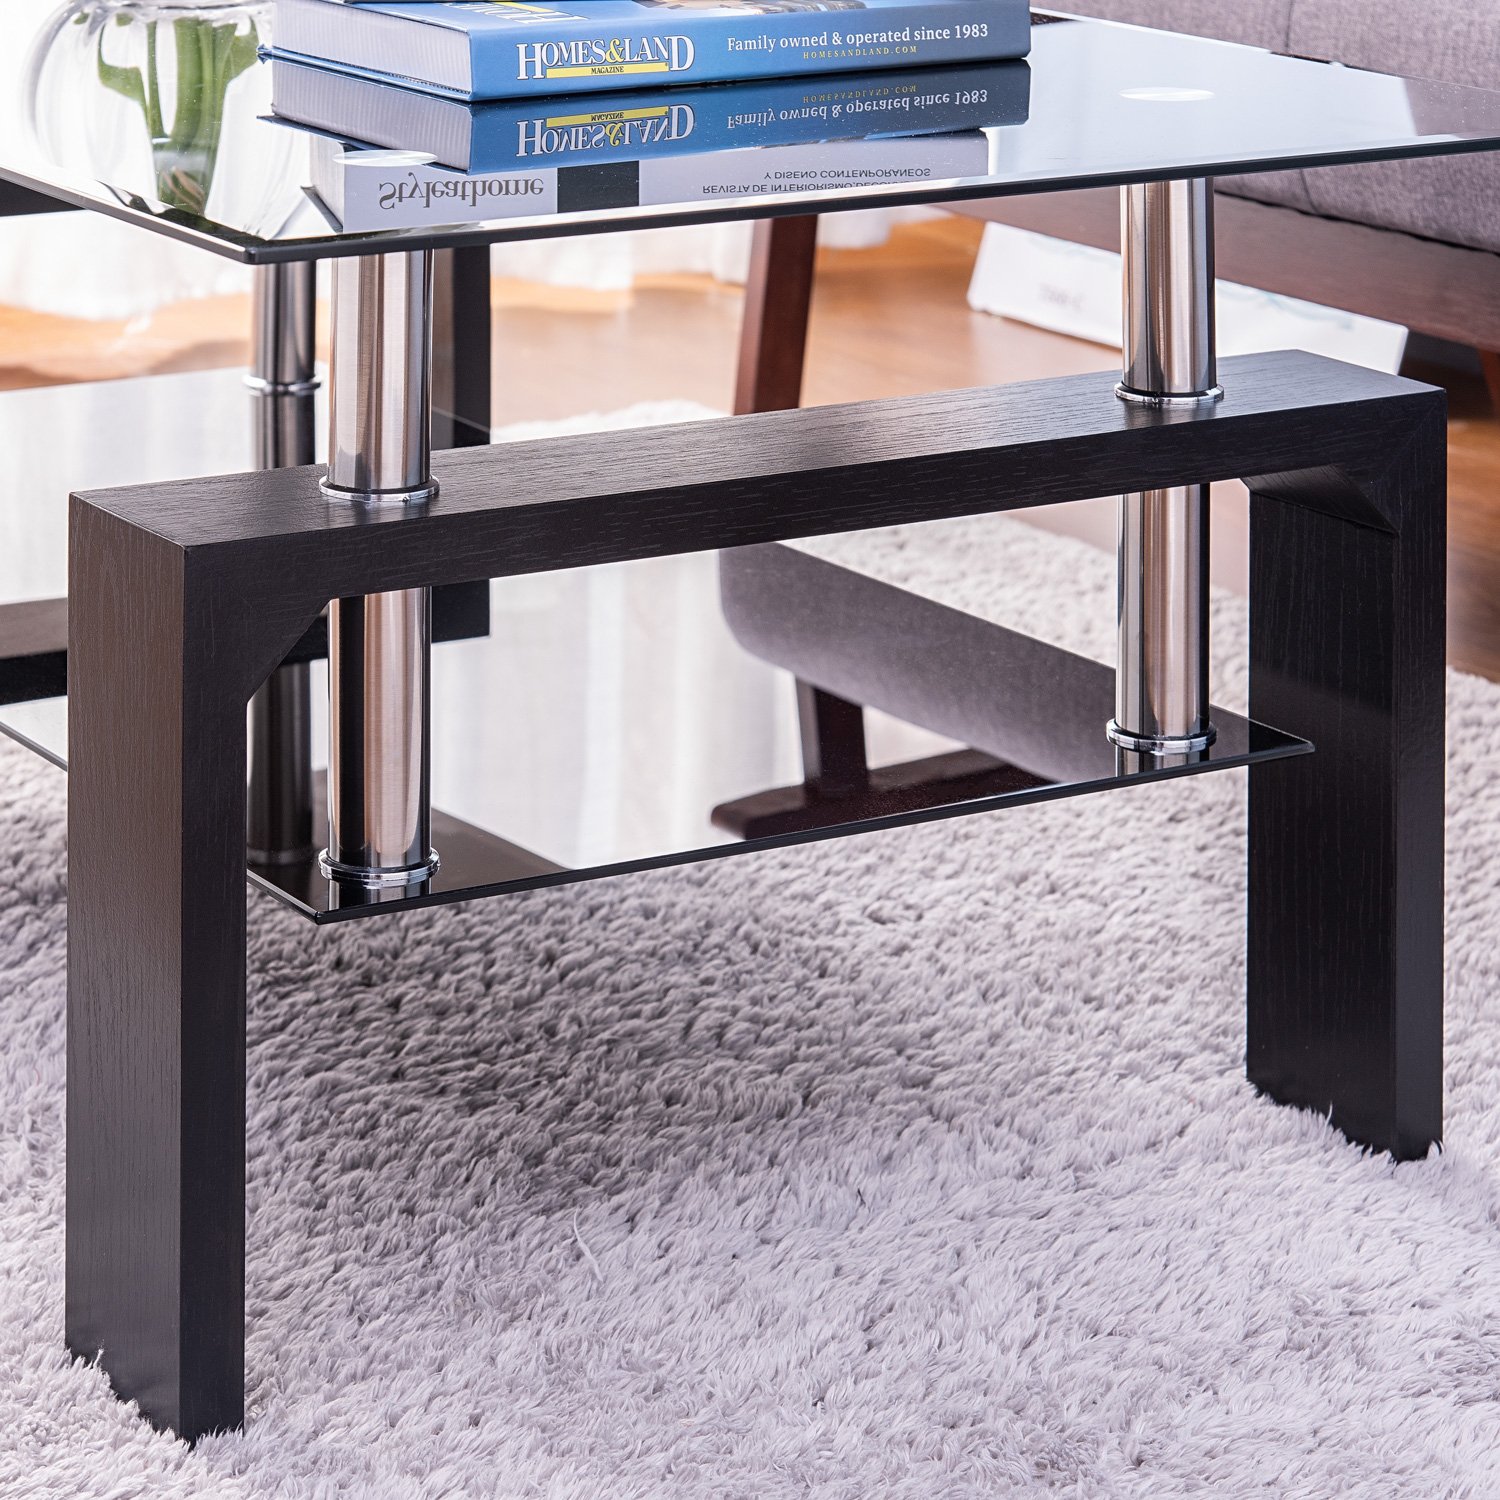 Rectangle Glass Coffee Table, Modern Side Center Table with Shelf & Wood Legs, Mid-Century Tempered Glass Top Tea Table for Living Room, Home Furniture Cocktail Coffee Table - Black, B1257 - image 5 of 8